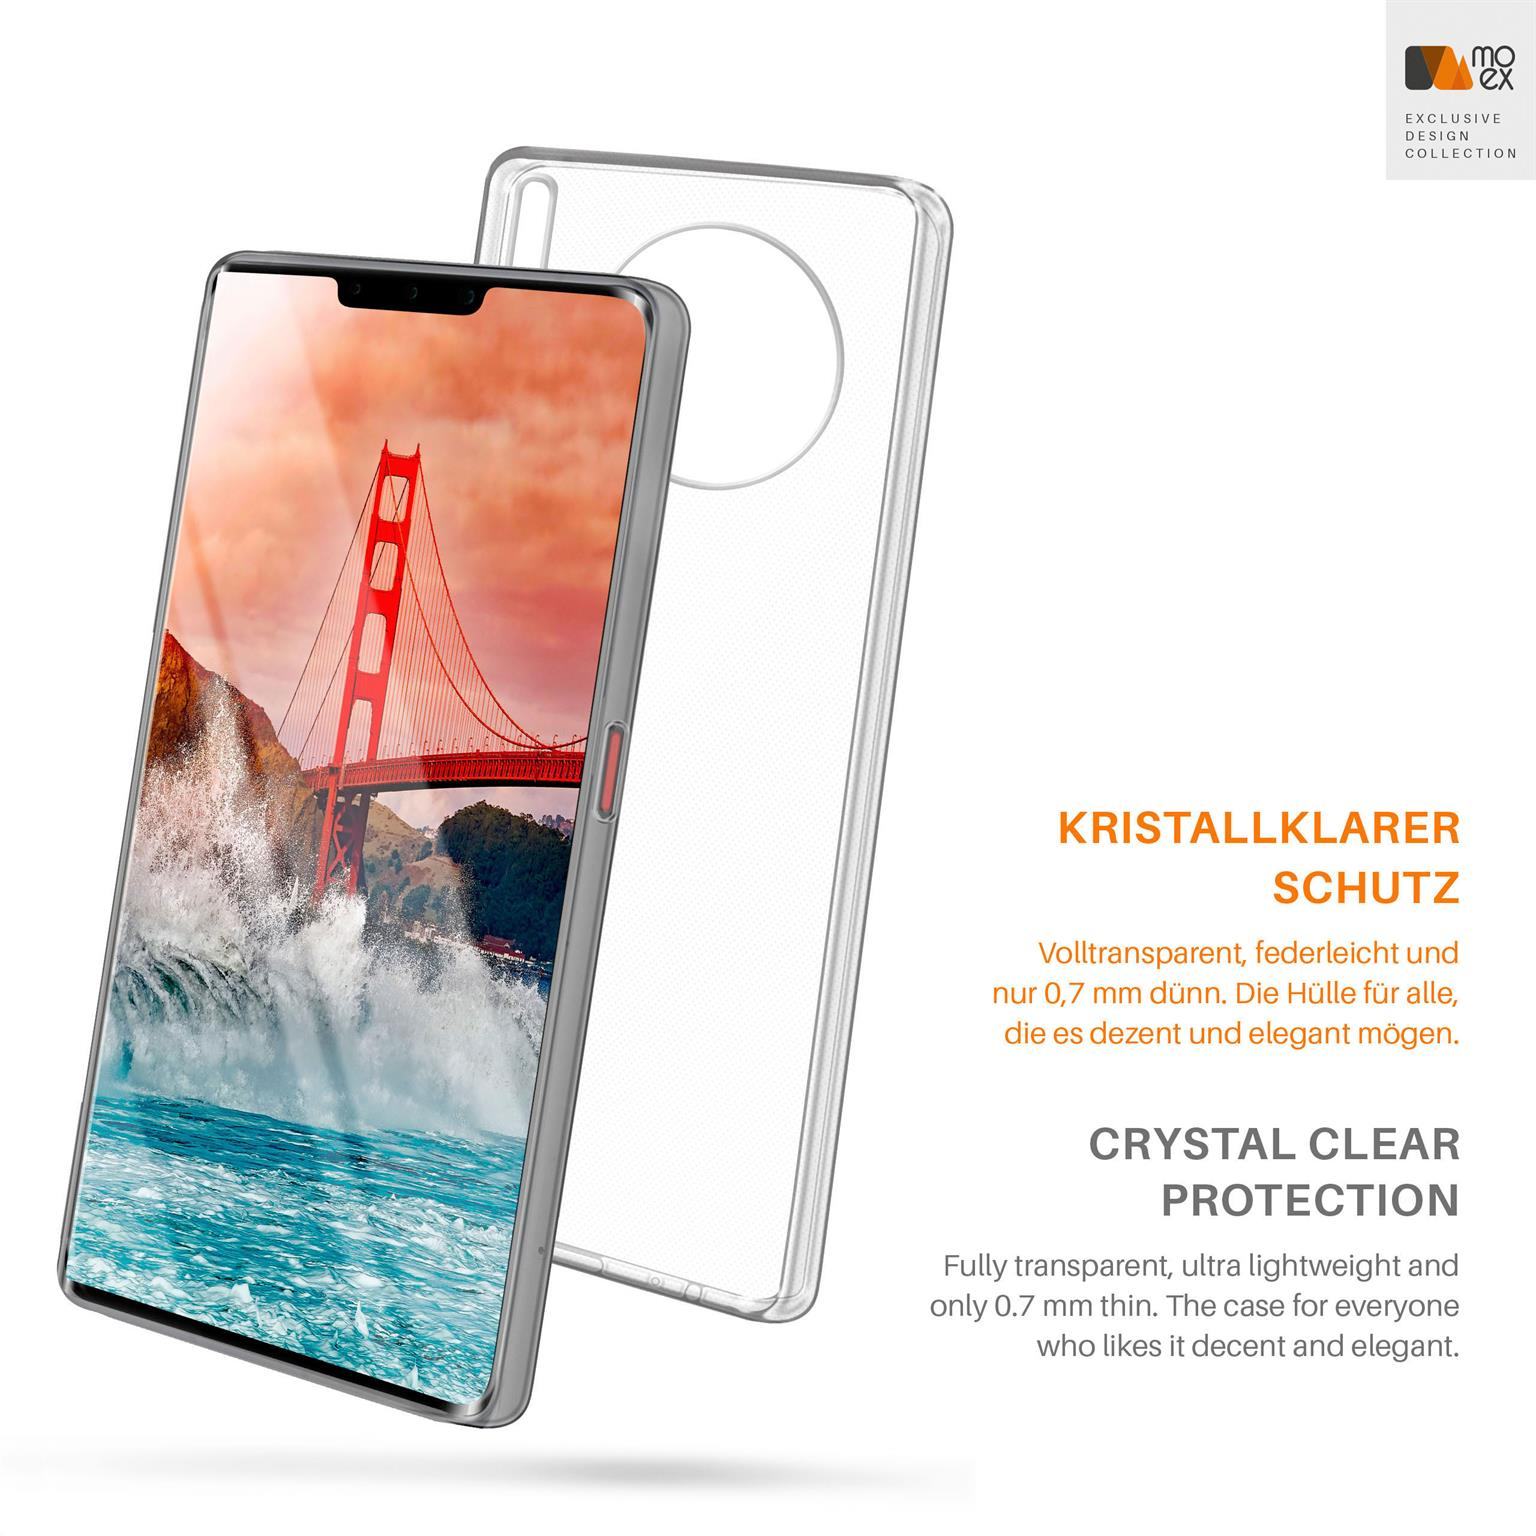 MOEX Aero Case, Backcover, Huawei, 30 Crystal-Clear Pro, Mate